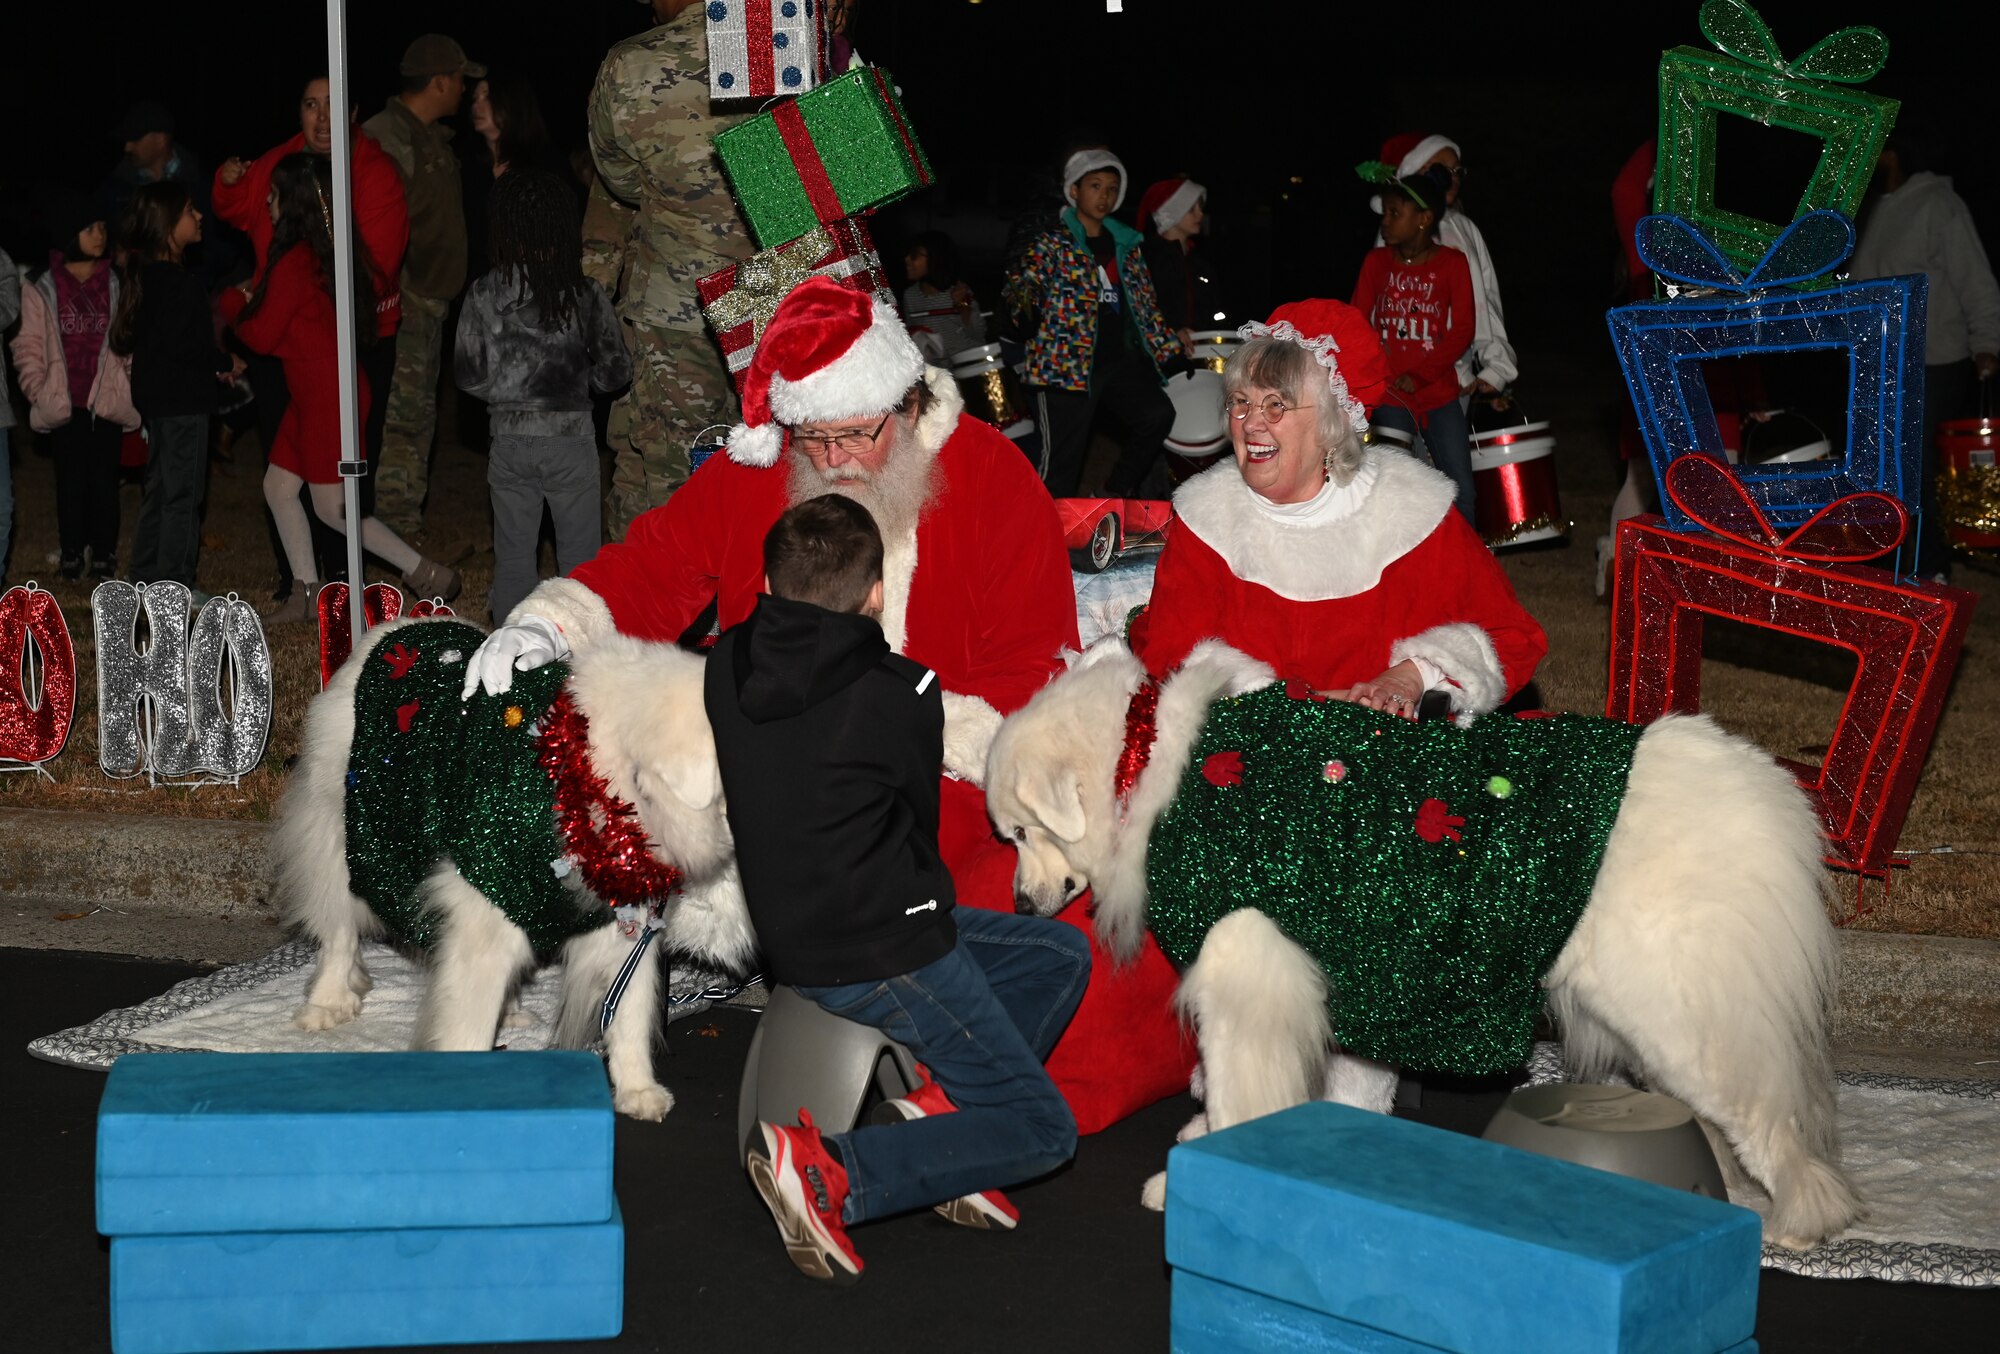 Children speak with Santa and Mrs. Claus during the Holiday Village and vendor fair at Seymour Johnson Air Force Base, North Carolina, Dec. 5, 2022. The celebration is hosted at the beginning of December each year for U.S. service members and their families. (U.S. Air Force photo by Airman 1st Class Rebecca Sirimarco-Lang)